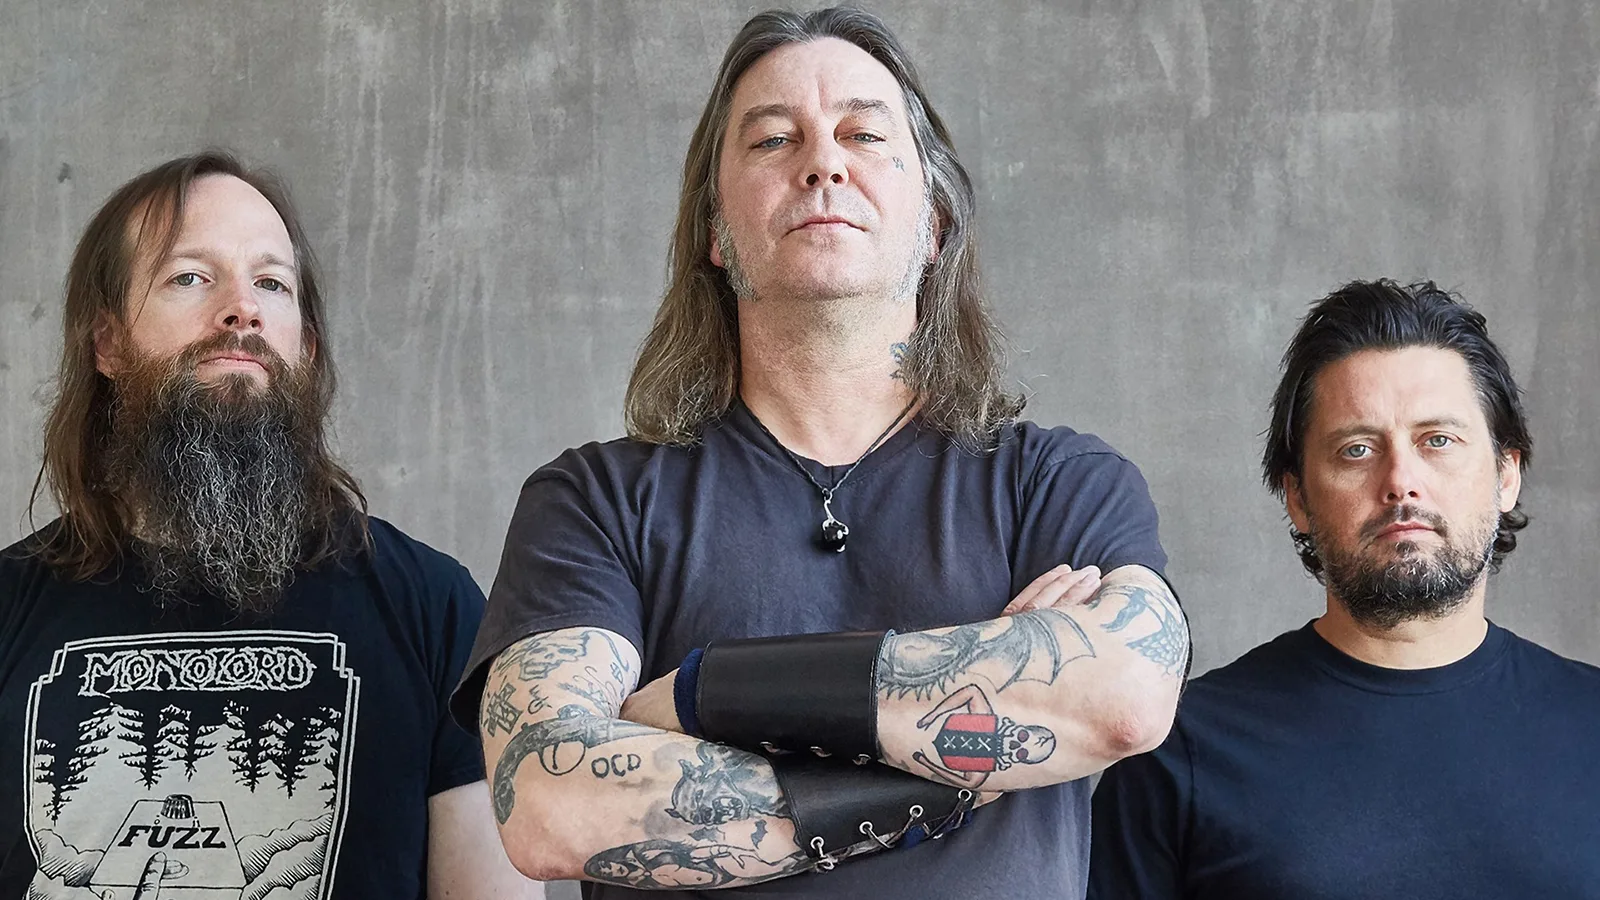 The members of High on Fire, guitarist/vocalist Matt Pike, bass player George Rice, and drummer Des Kensel, pose side by side.